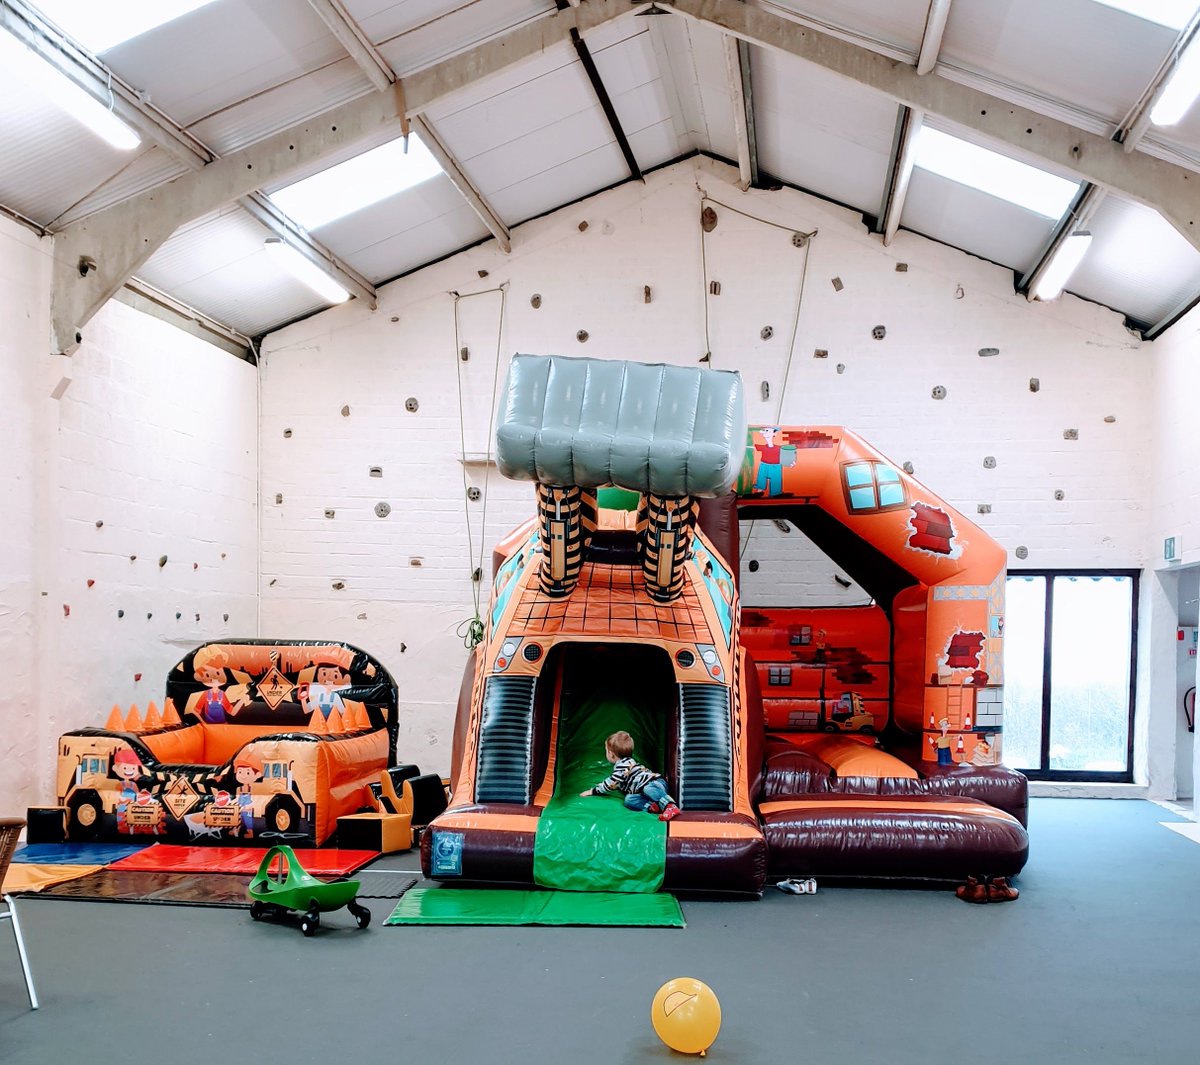 Party Time🥳 Our Activity Barn is a great versatile for all occasions.
For more information see link in bio or email hello@clynefarm.com

#BarnHire #BirthdayPartyRoomHire #RoomHire #ClyneFarmCentre #FamilyRunBusiness #BookDirect #Swansea #SwanseaBay #Mumbles #Gower #LoveGower